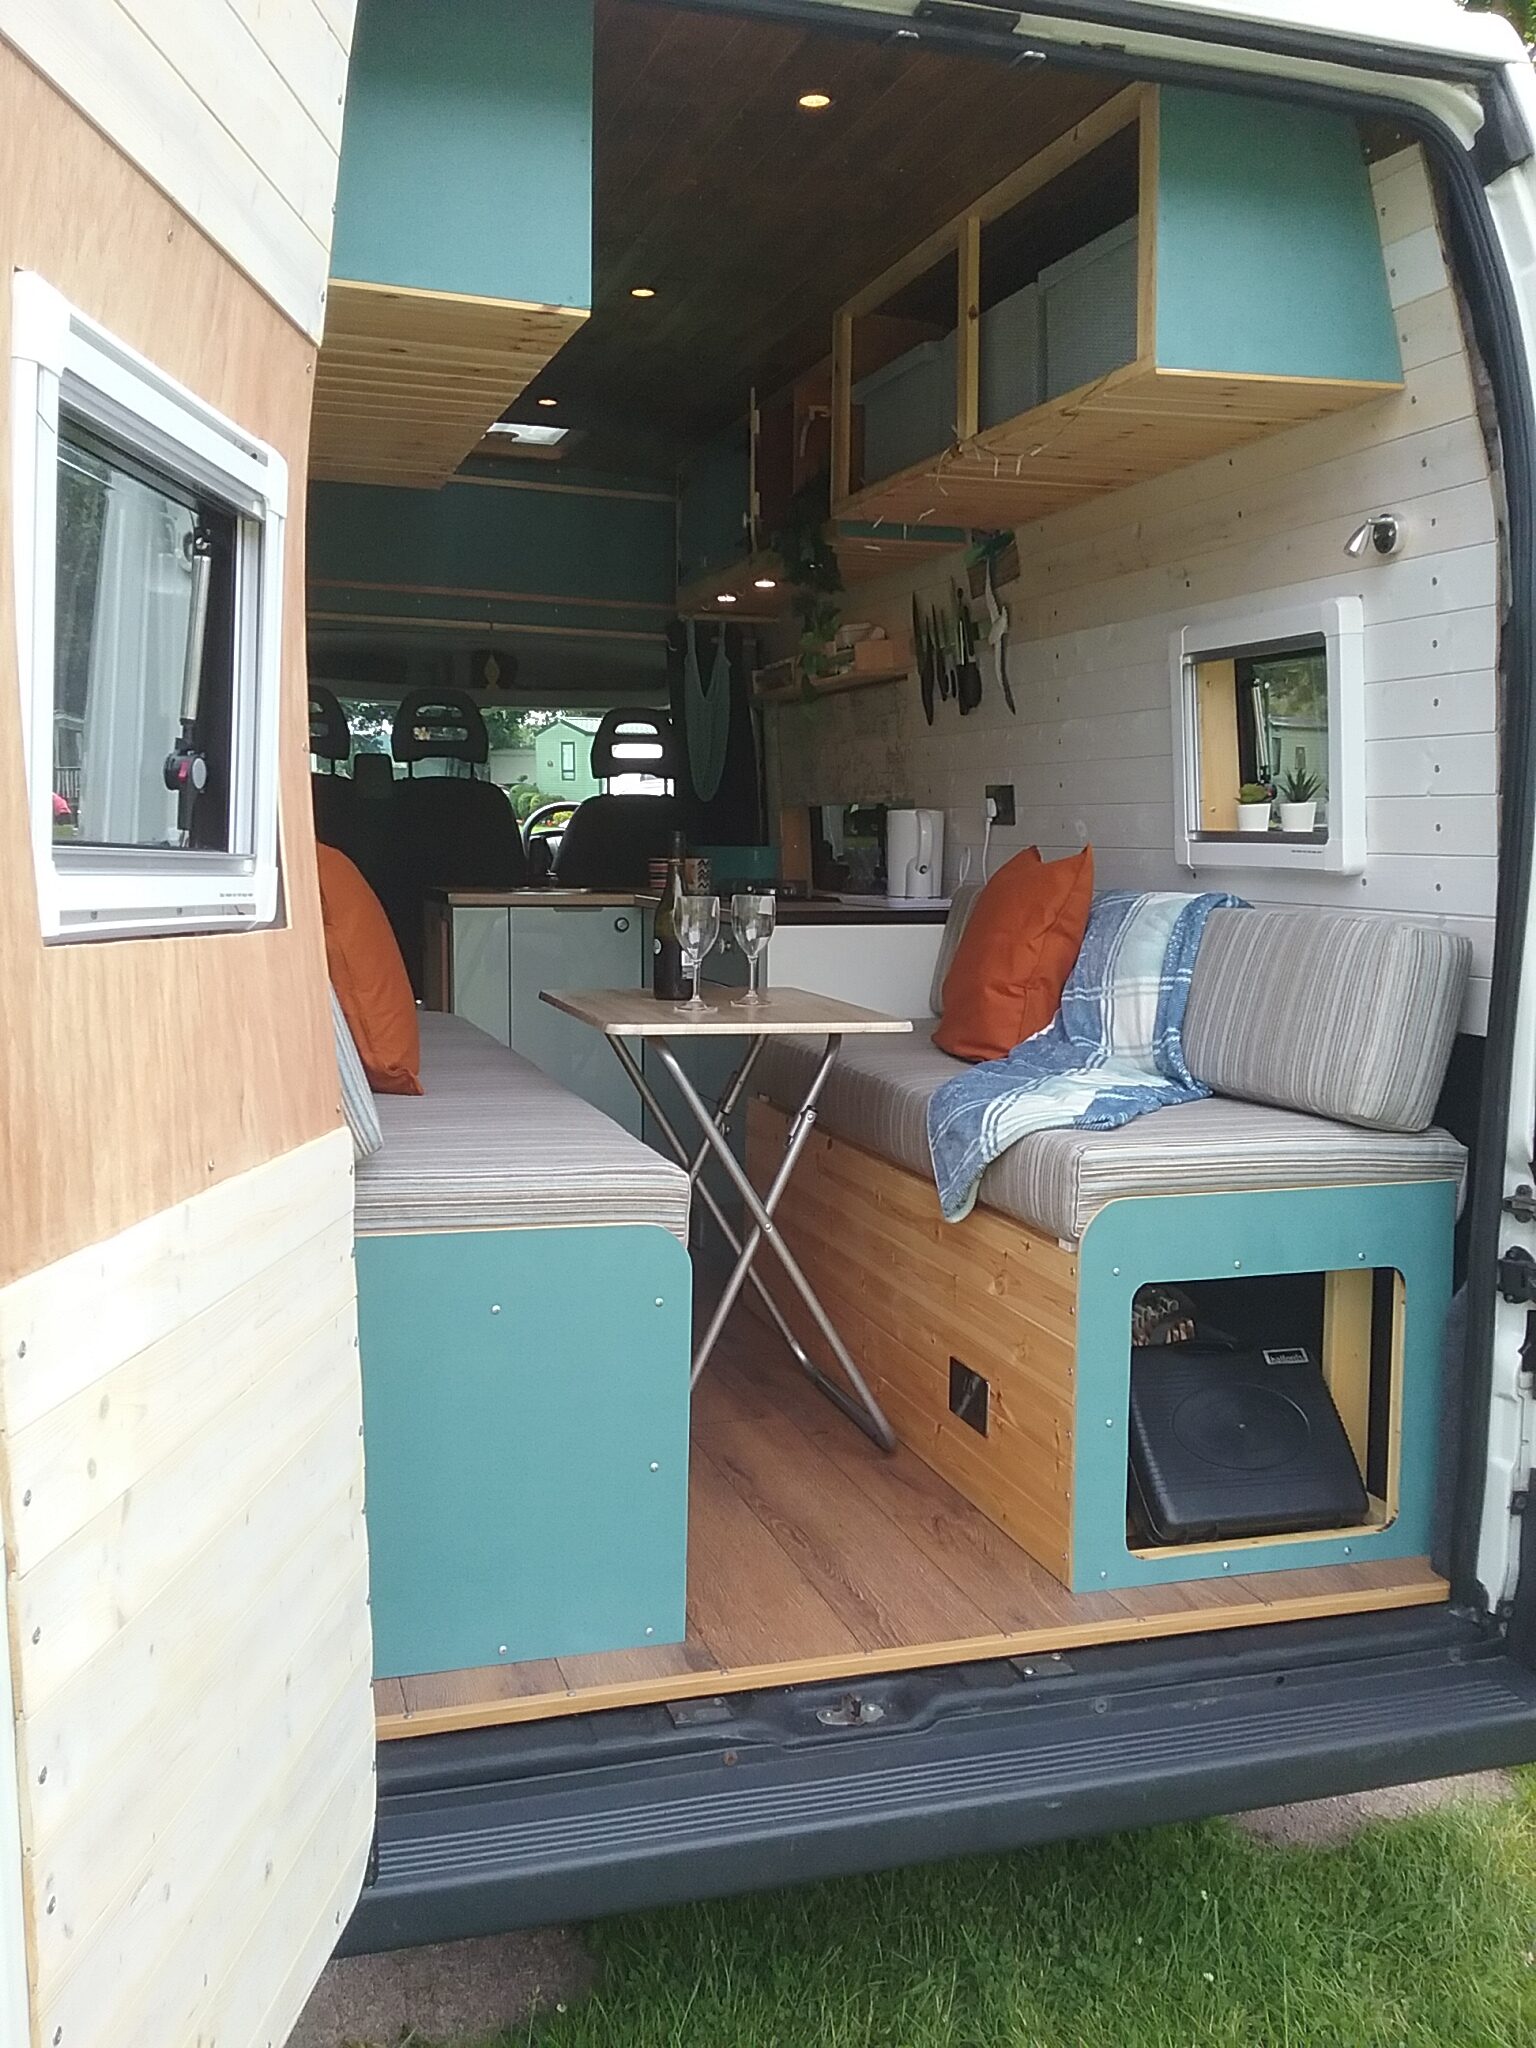 A converted camper van with the rear doors open reveals a cozy interior. The space includes two cushioned bench seats with orange throw pillows, a folding table in between, and overhead storage cabinets. The wooden paneling and plants add a homey touch. A front cab area is visible beyond the living space.